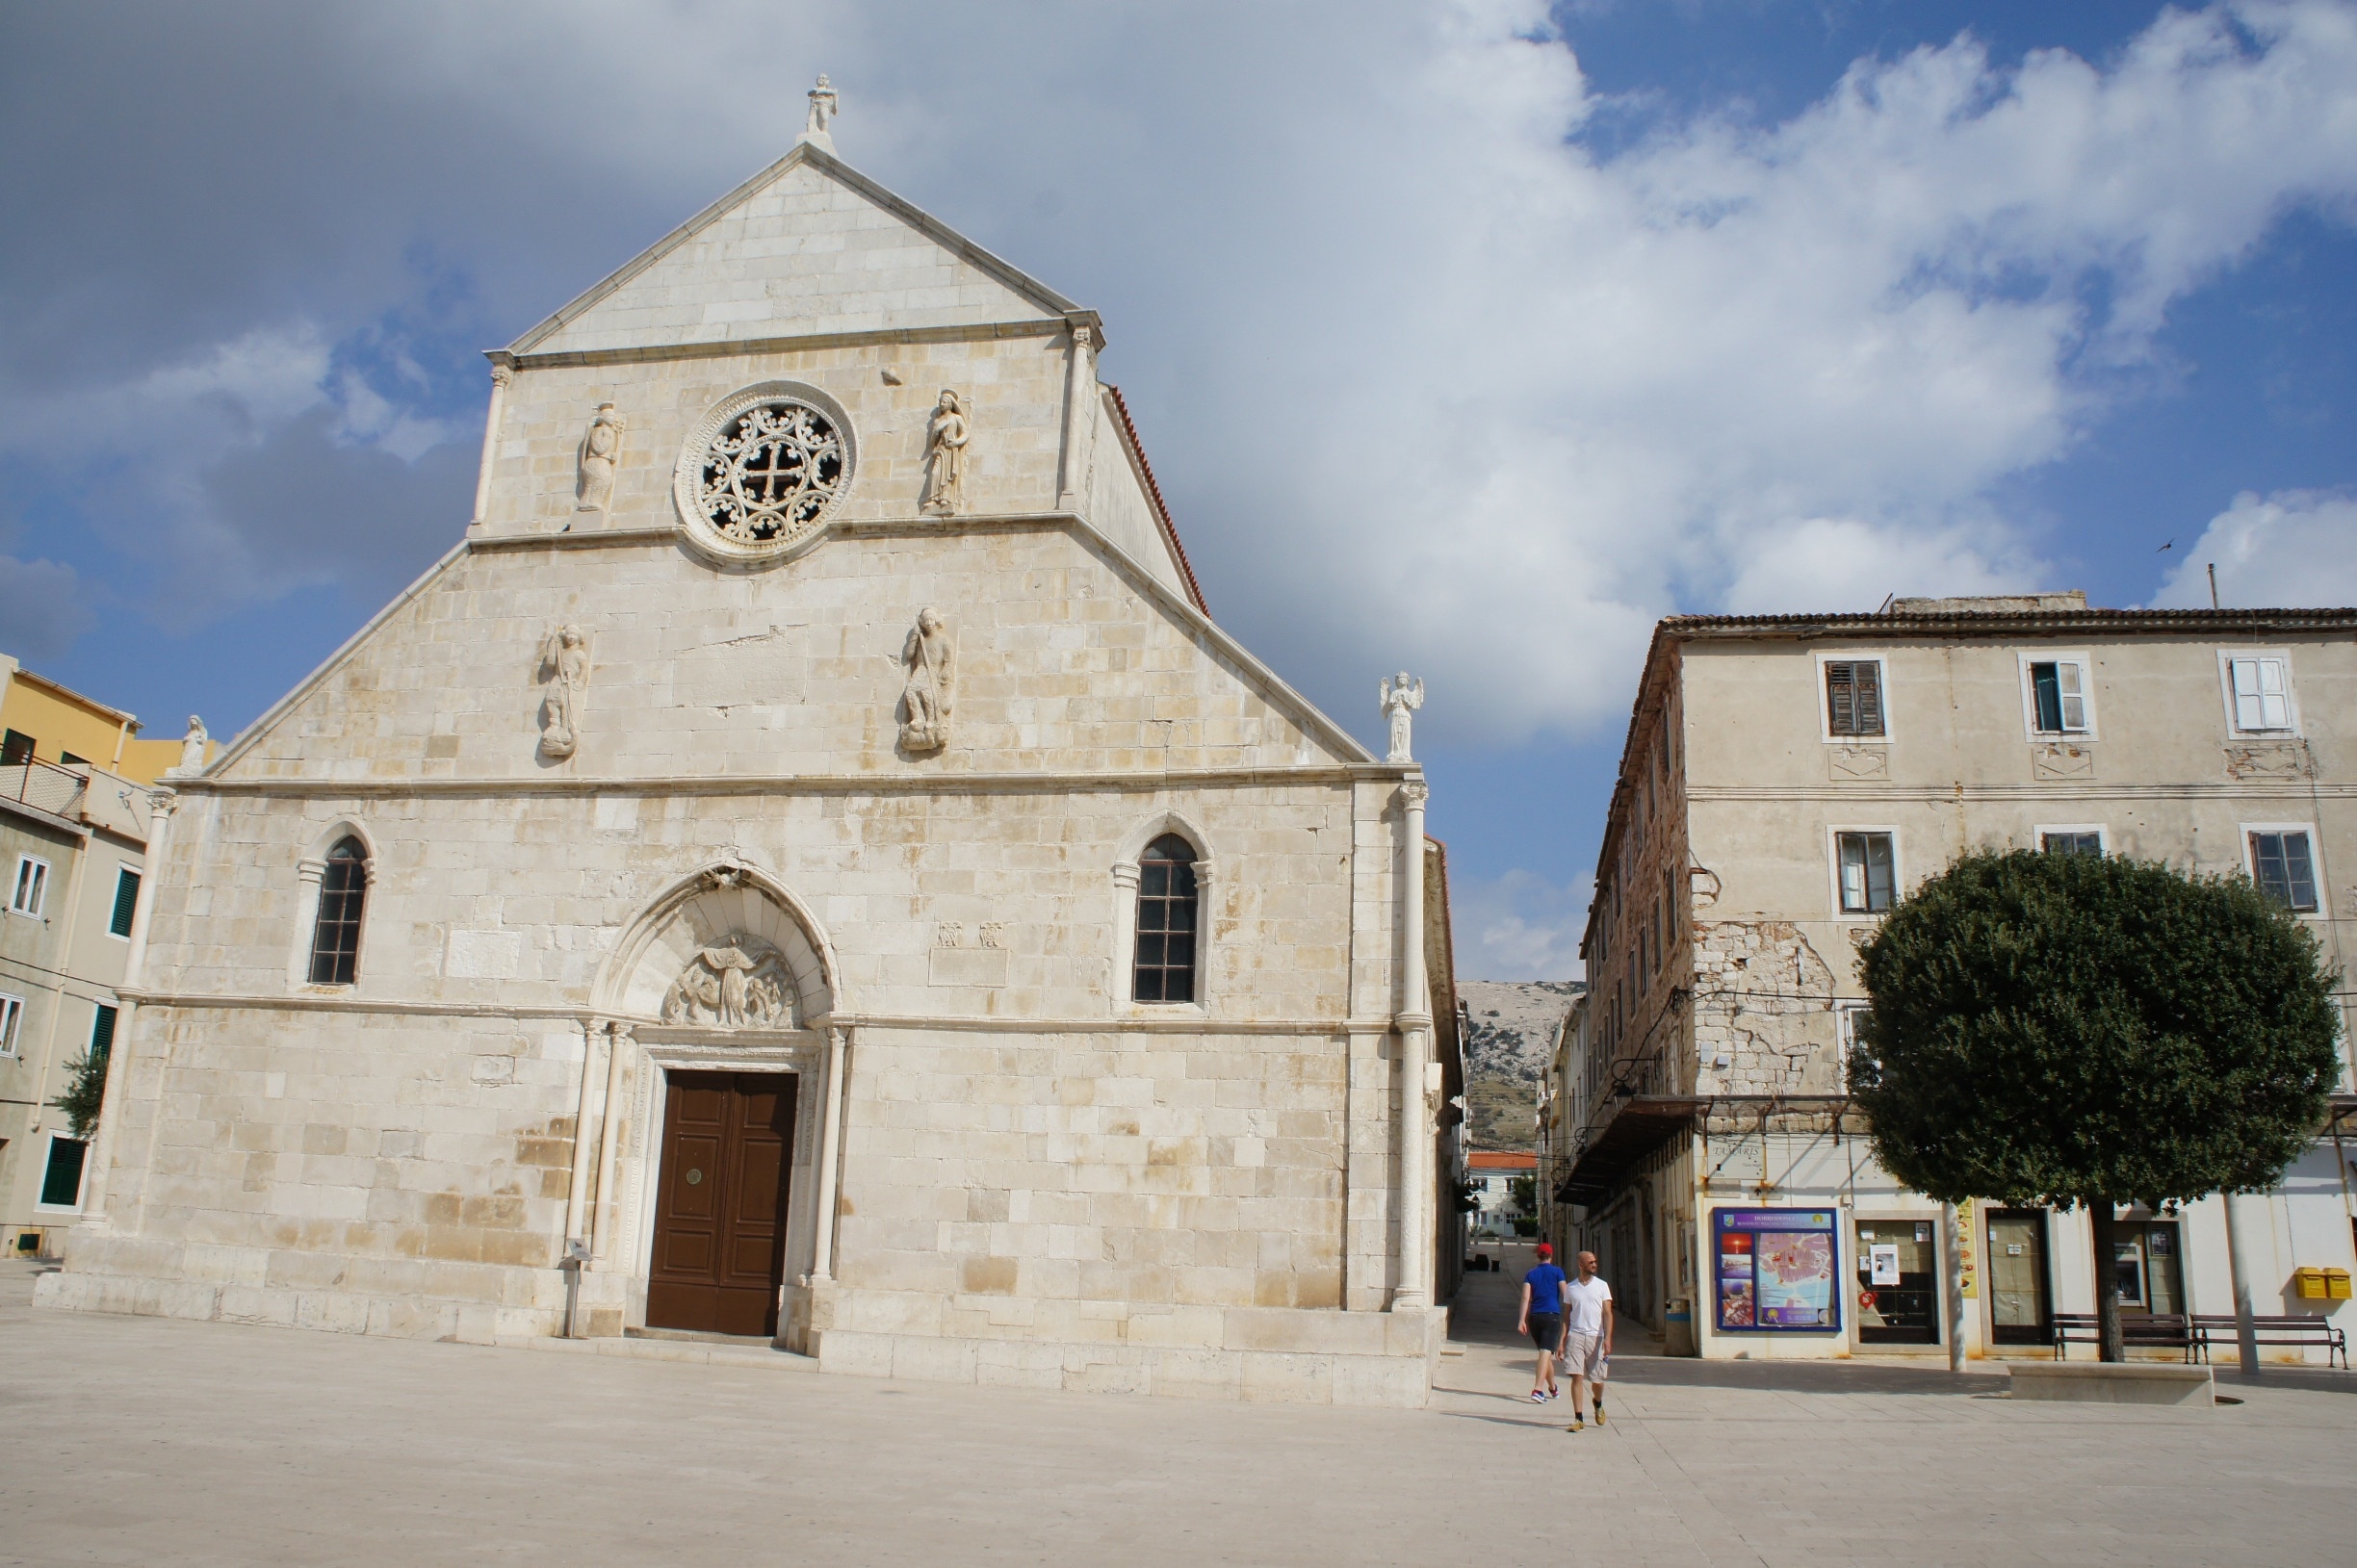 The church of Saint Mary in the center of the town Pag, on Pag island in Croatia.